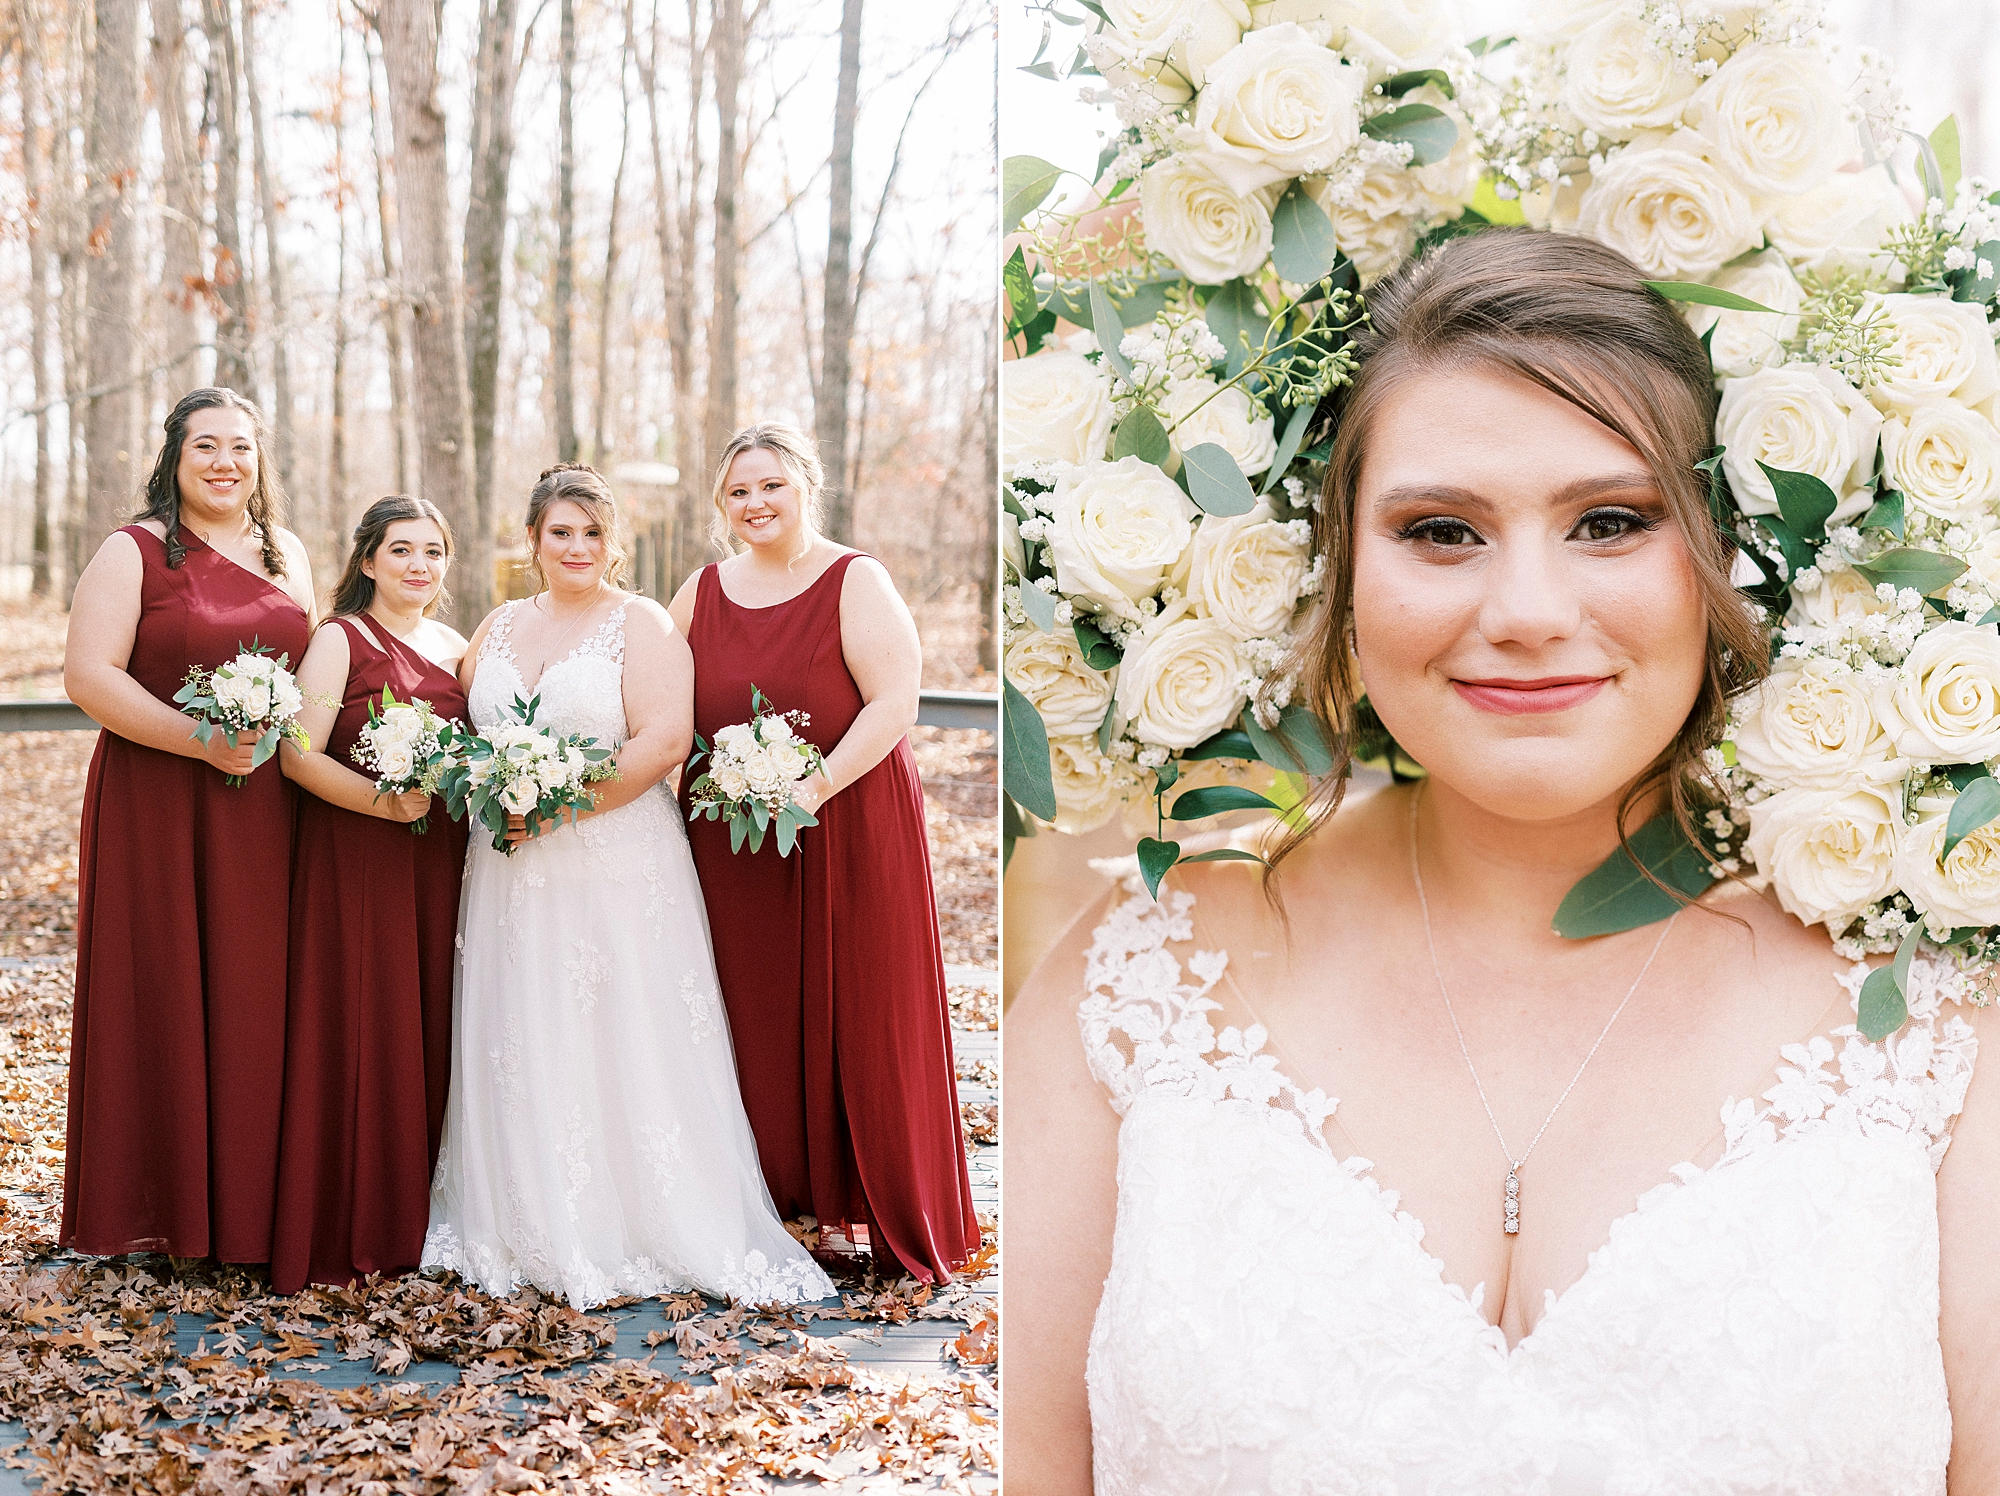 bride poses with bridesmaids in red gowns holding flowers in frame around her face 